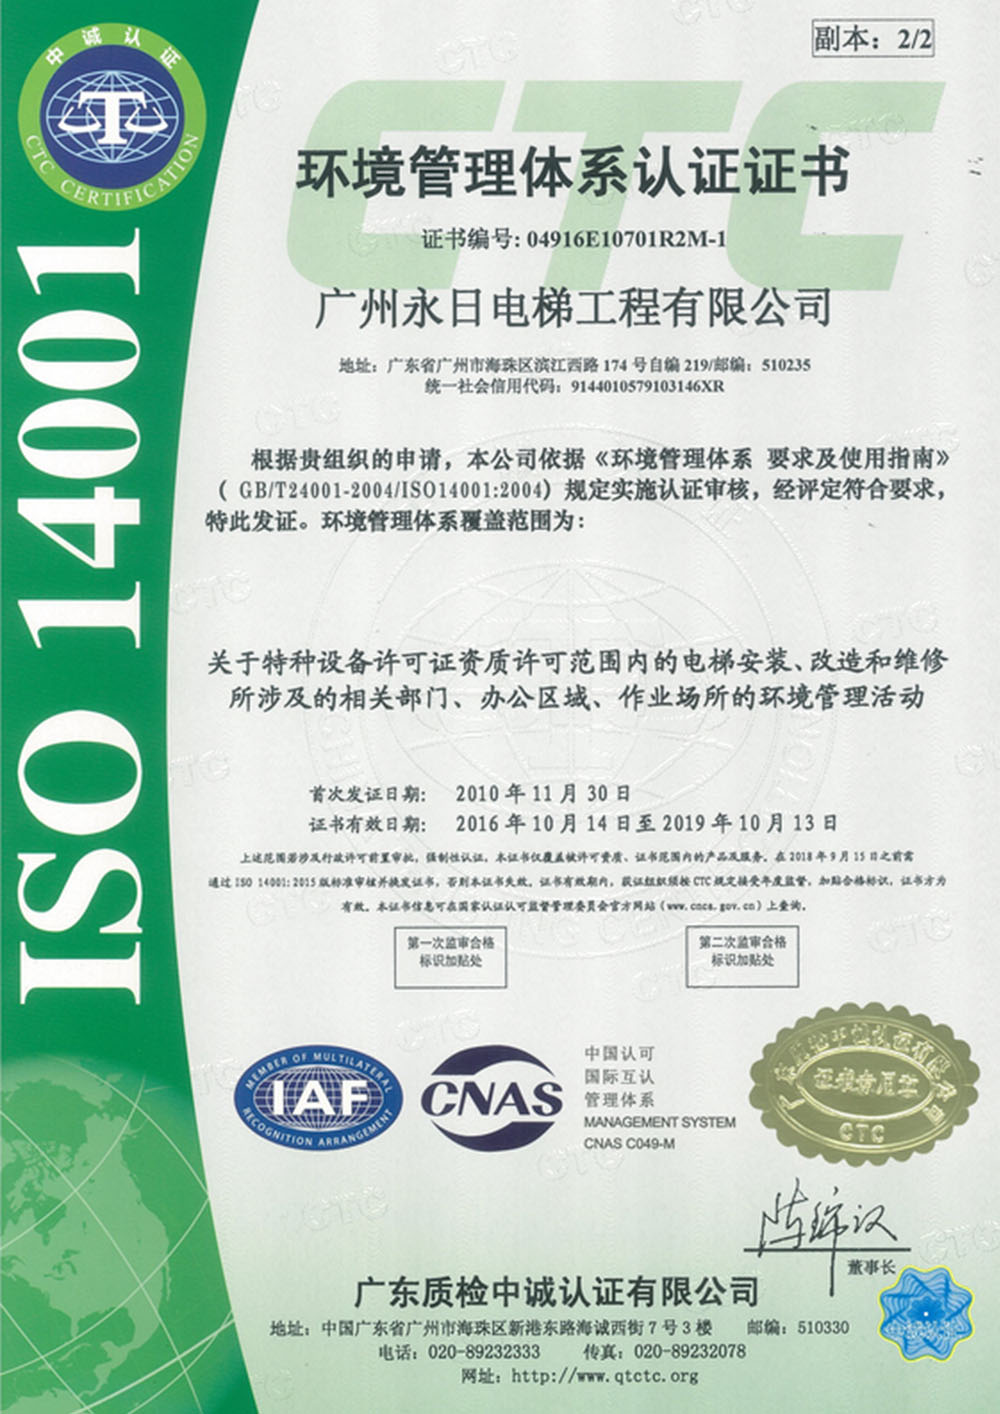 ISO14001 system certification